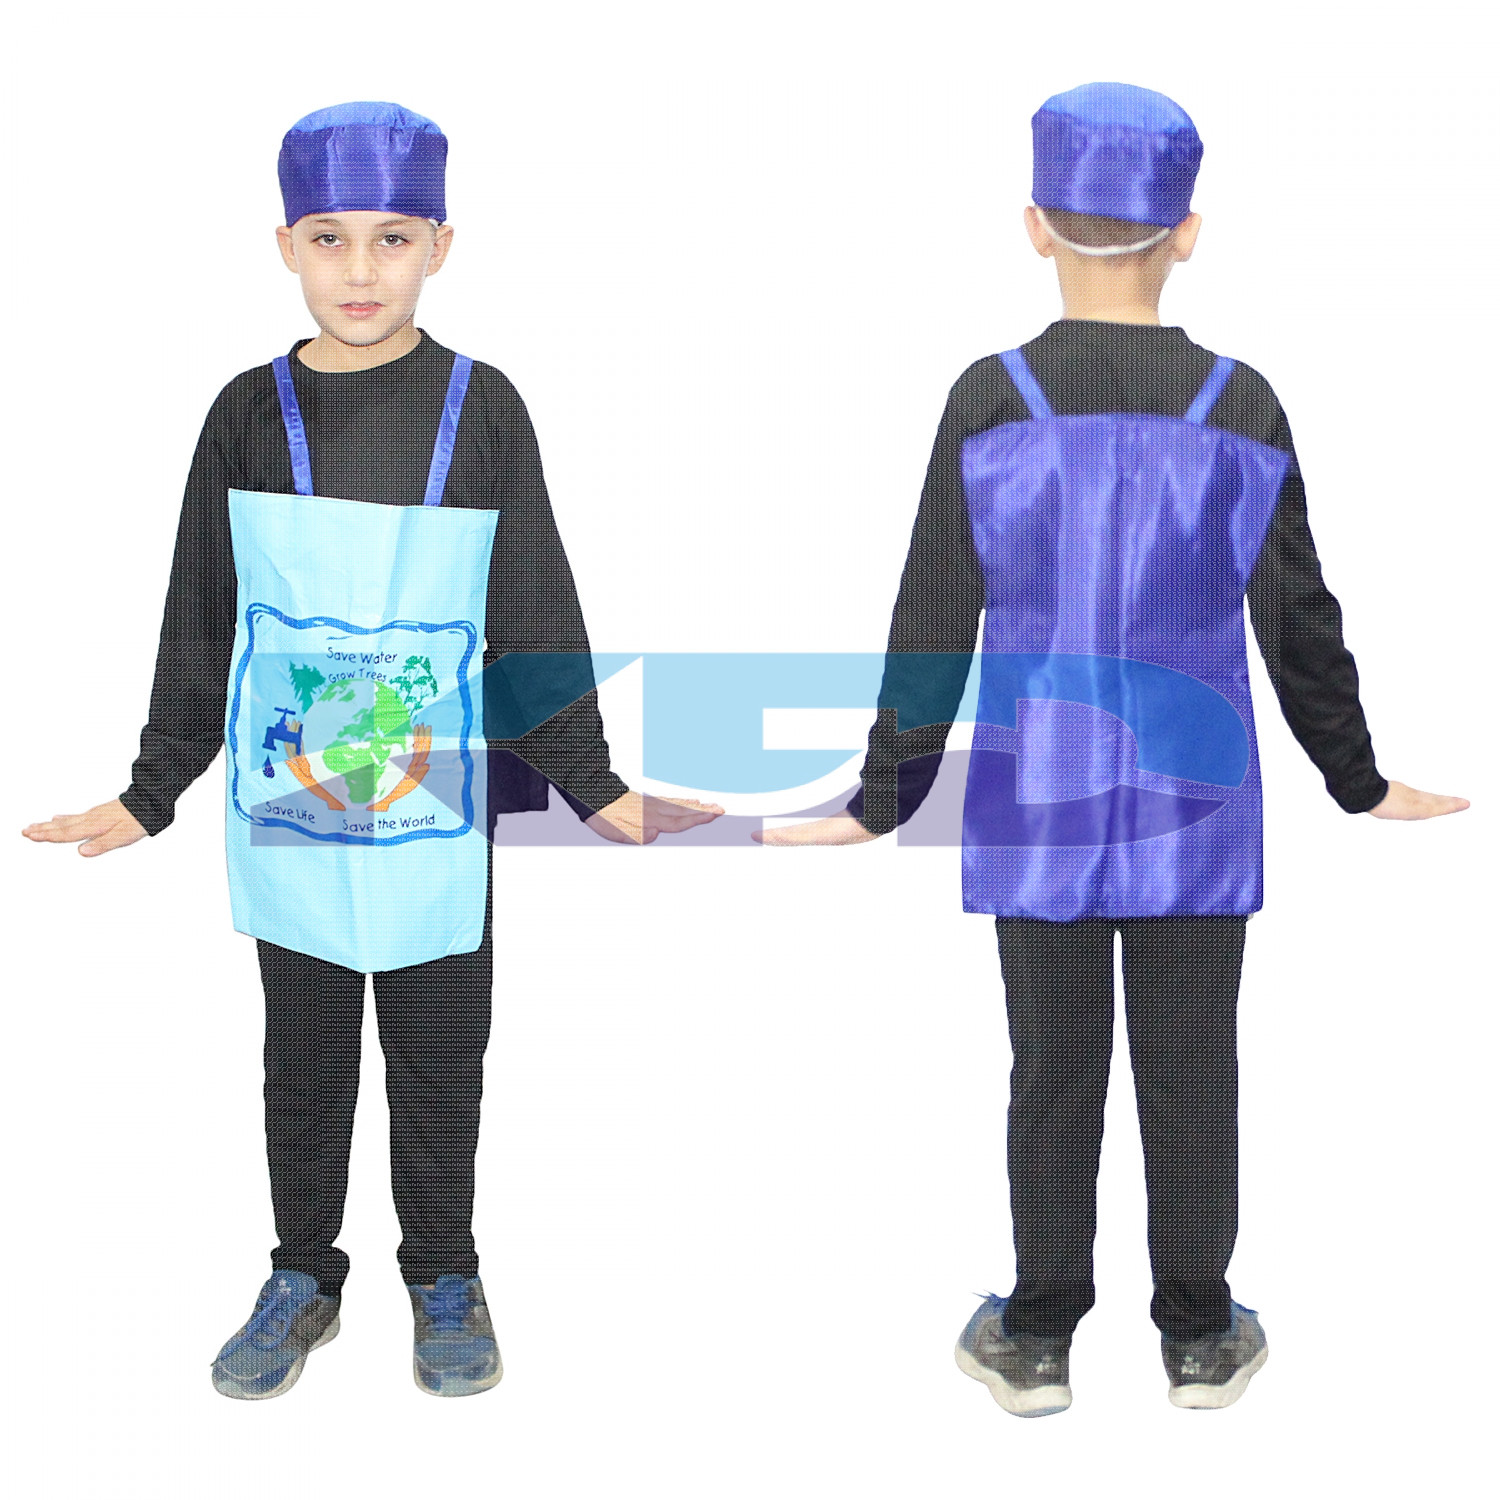 Save The Water Fancy Dress For Kids/Nature Costume For Kids/Water Fancy Dress/For Kids Annual function/Theme Party/Competition/Stage Shows/Birthday Party Dress